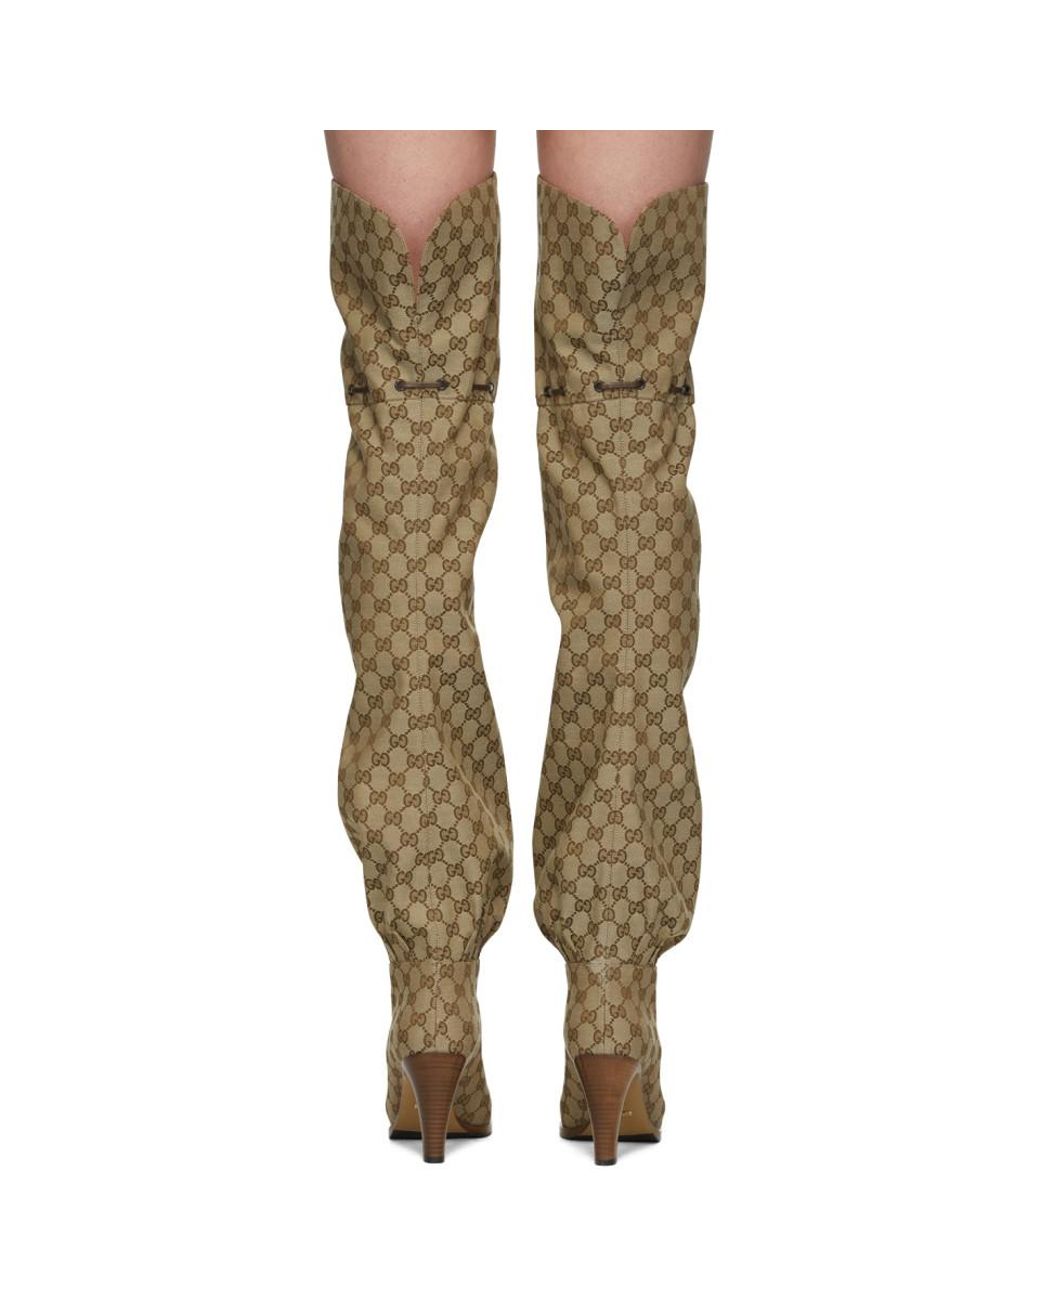 Gucci Lisa $3,650 Over The Knee Thigh High Black Leather Boots